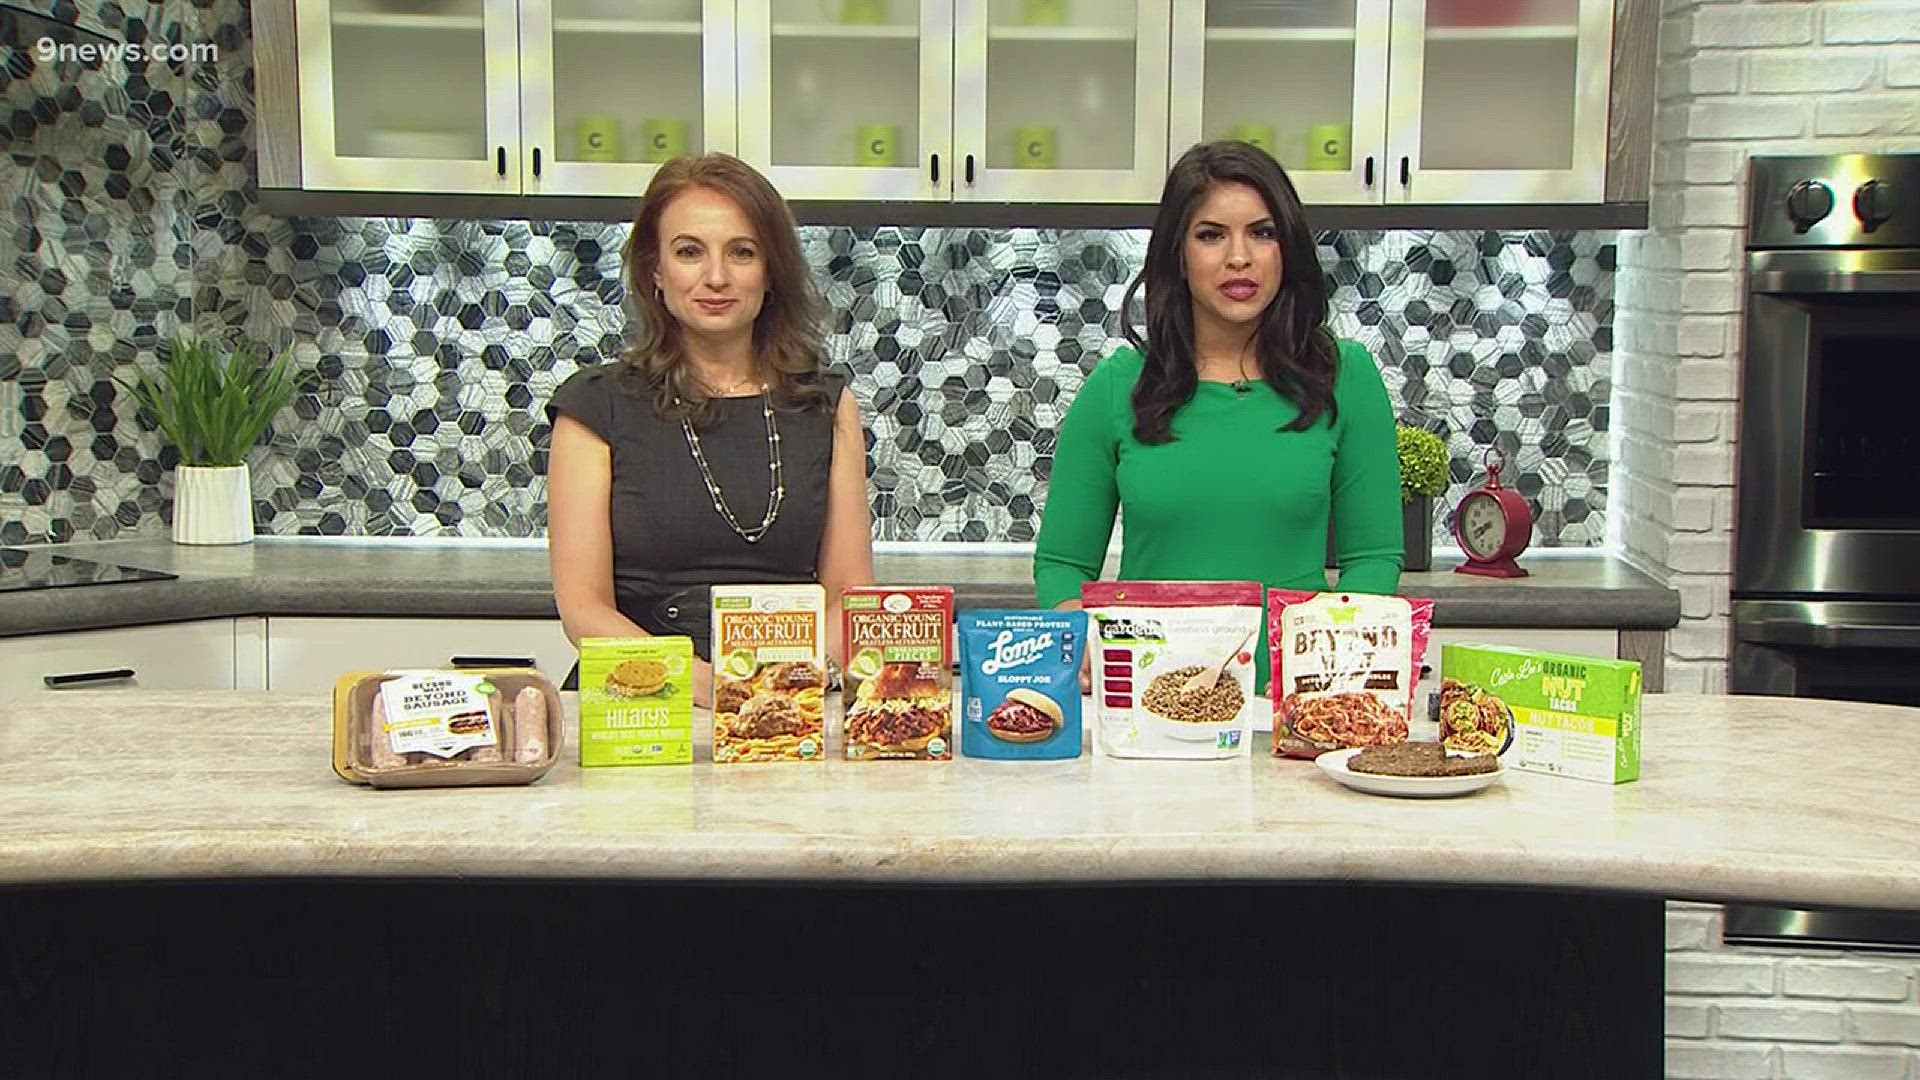 Our 9NEWS nutrition expert looks at some of the alternatives to meat that are on the market or served at restaurants.